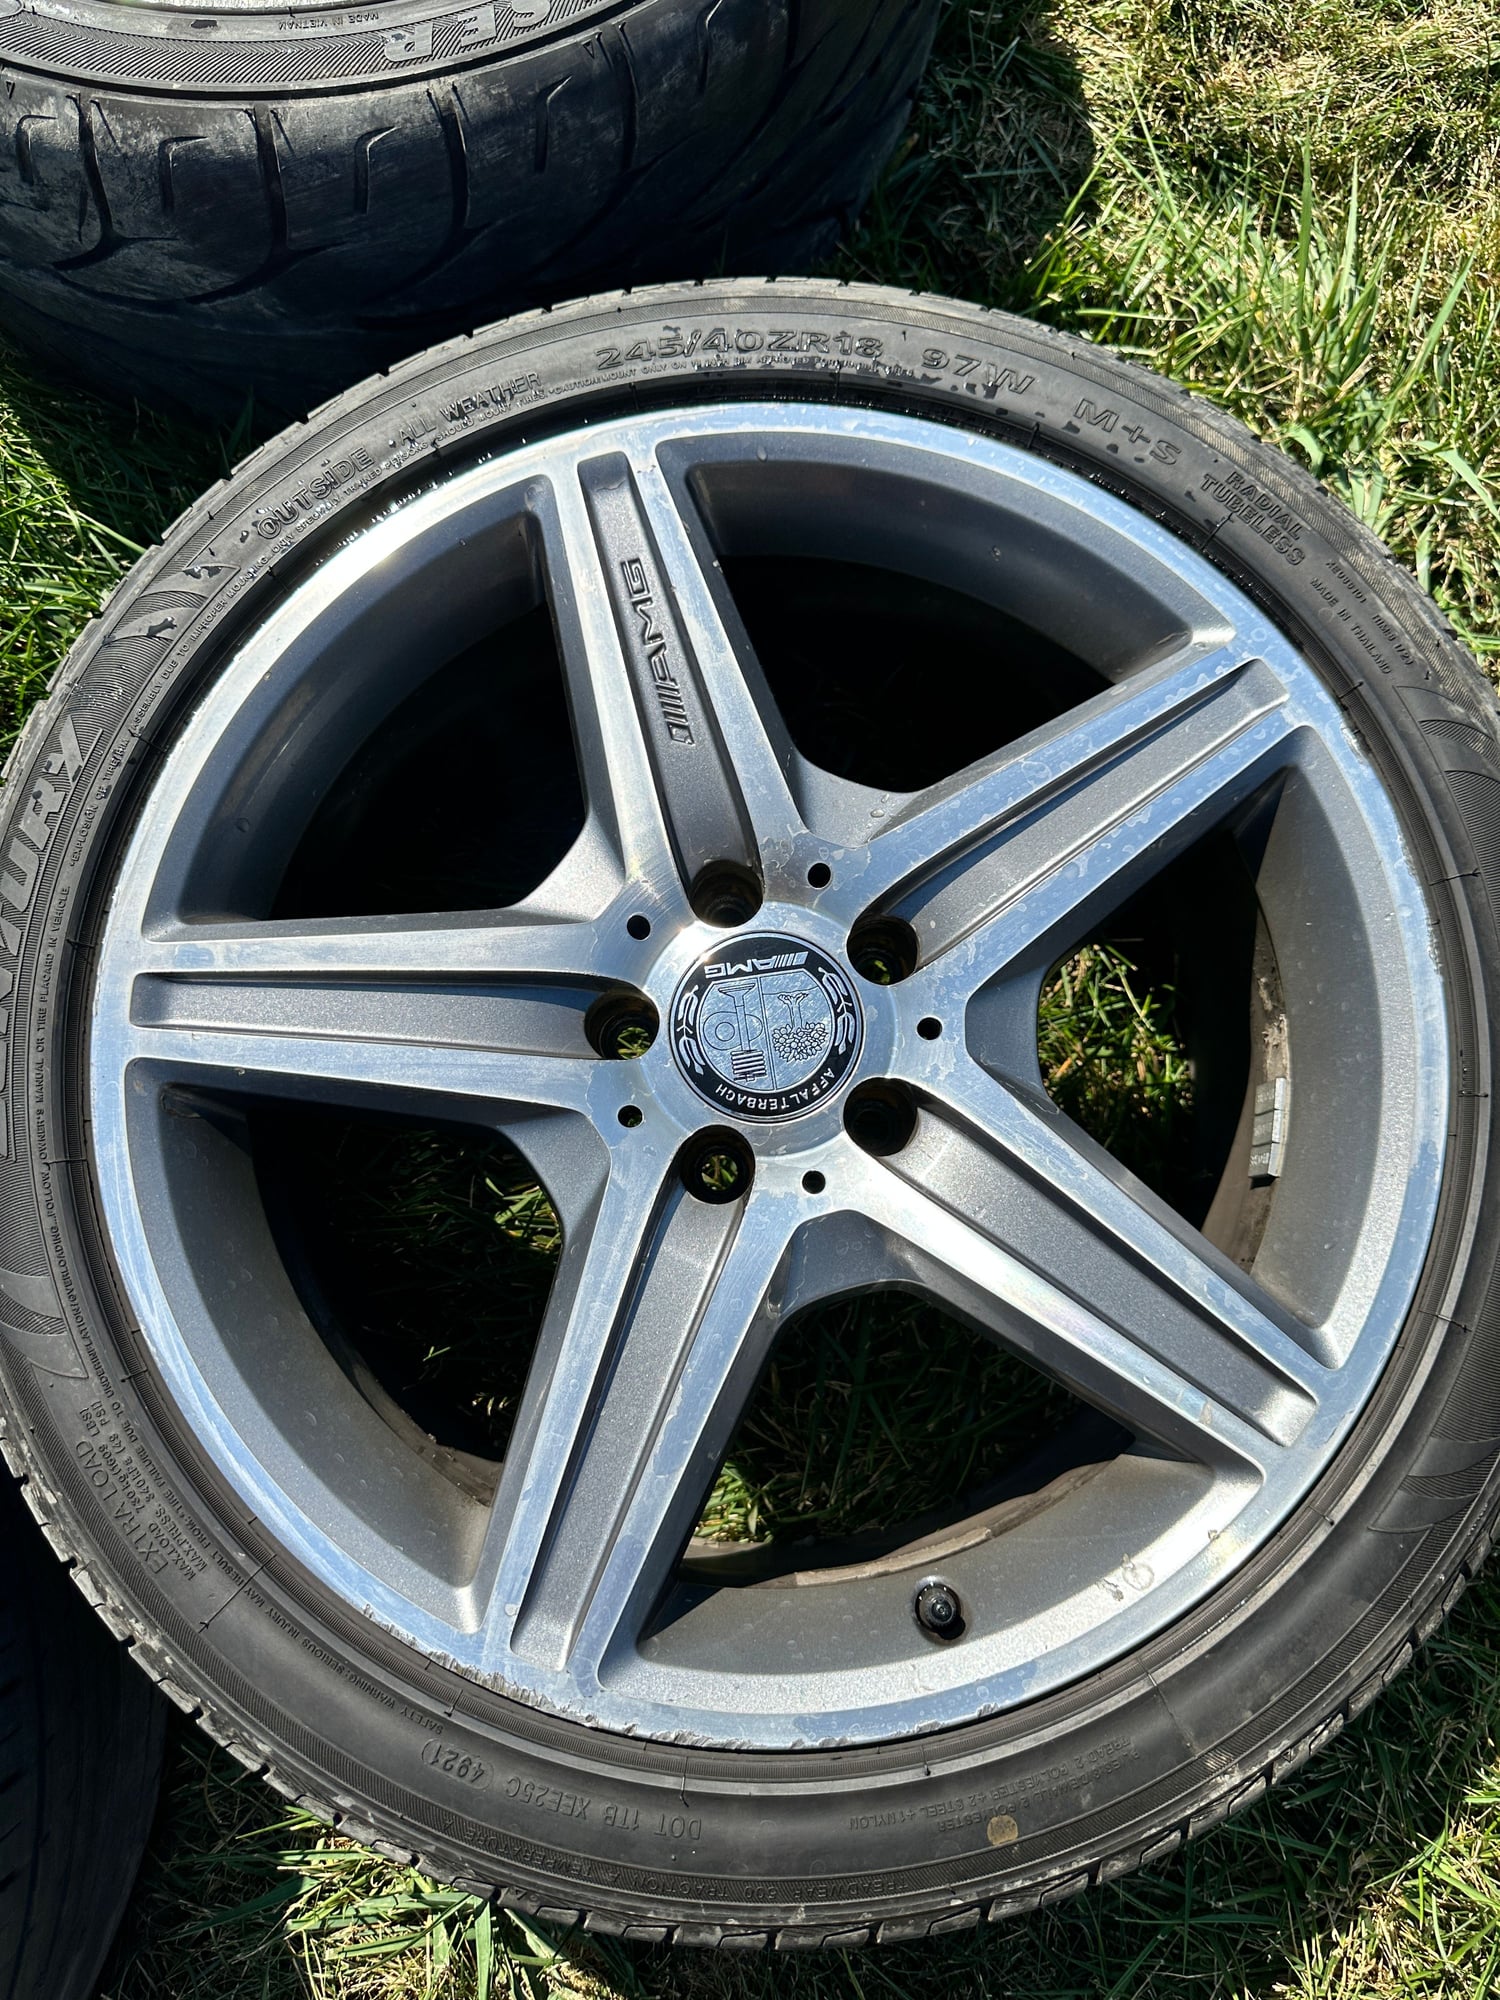 Wheels and Tires/Axles - W211 E63 Wheels - Used - 2007 to 2009 Mercedes-Benz E63 AMG - 2003 to 2006 Mercedes-Benz E55 AMG - 2003 to 2009 Mercedes-Benz E-Class - 2003 to 2009 Mercedes-Benz SL55 AMG - Columbus, OH 43213, United States